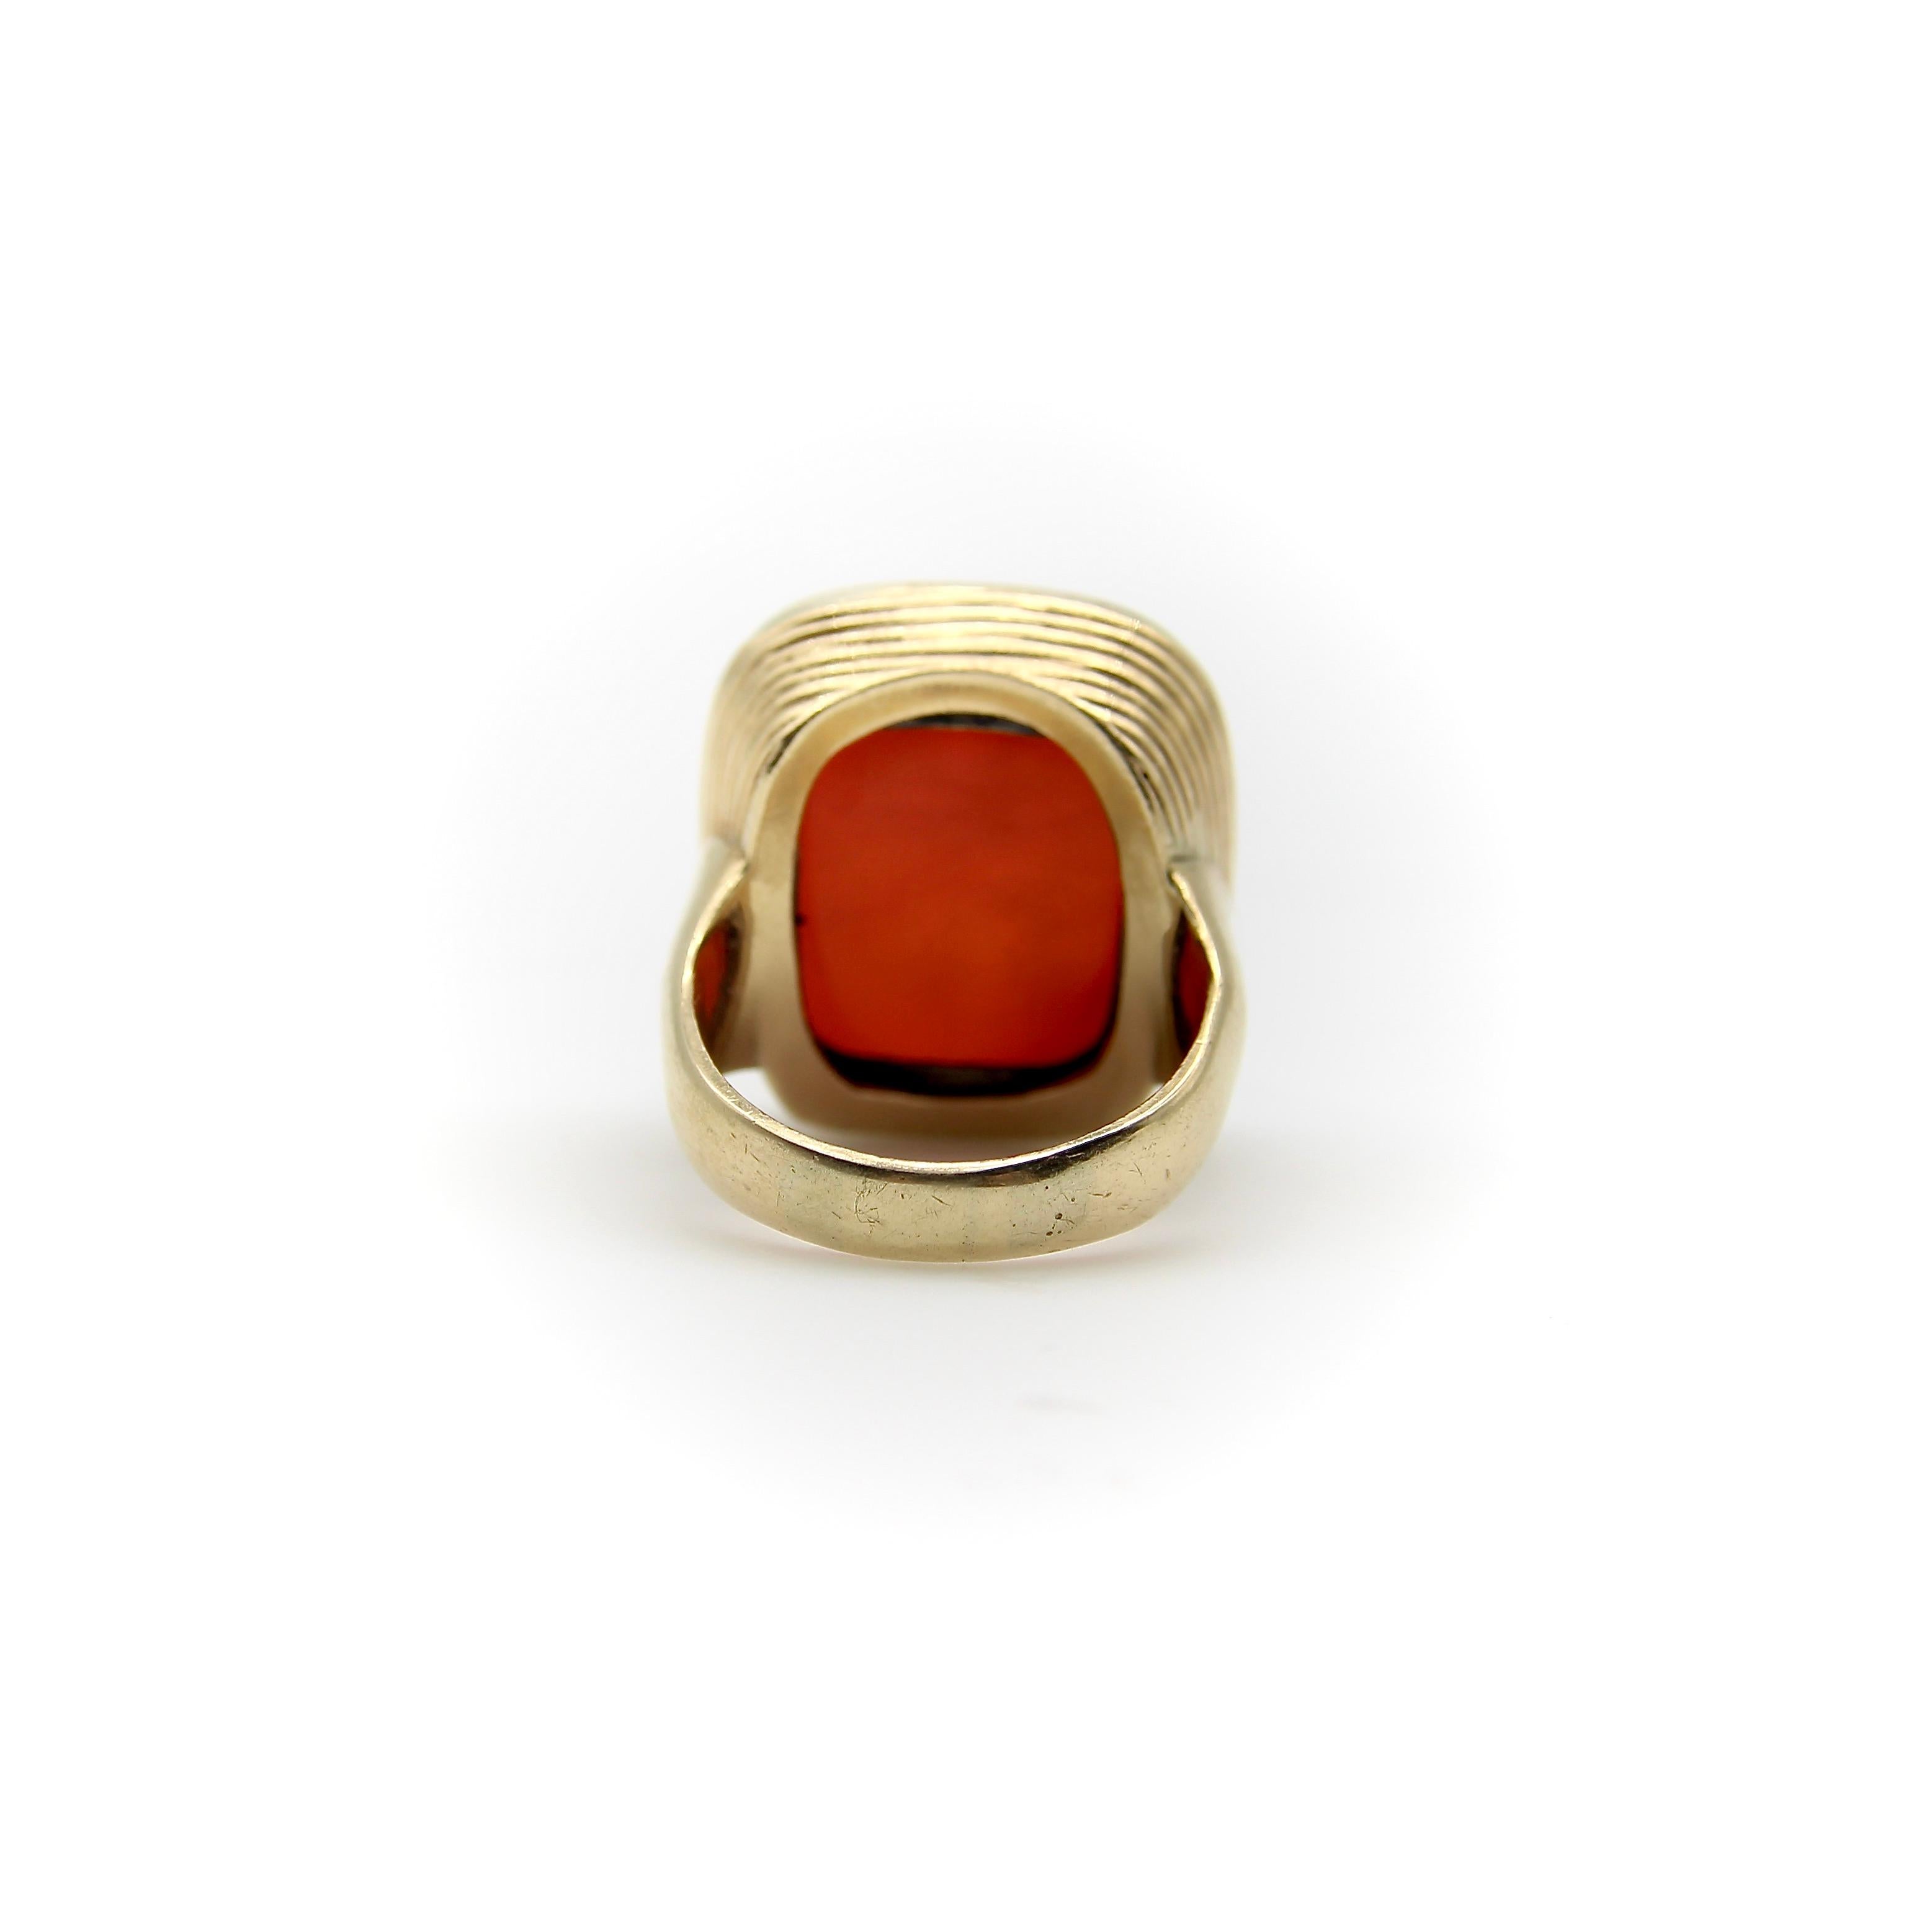 Circa the 1860’s, this 14k gold carnelian intaglio ring contains a family crest with amazing details. Sitting atop a shield is a winged griffin holding a flower in its mouth. As if the artist wanted you to see the griffin up close, the next image is